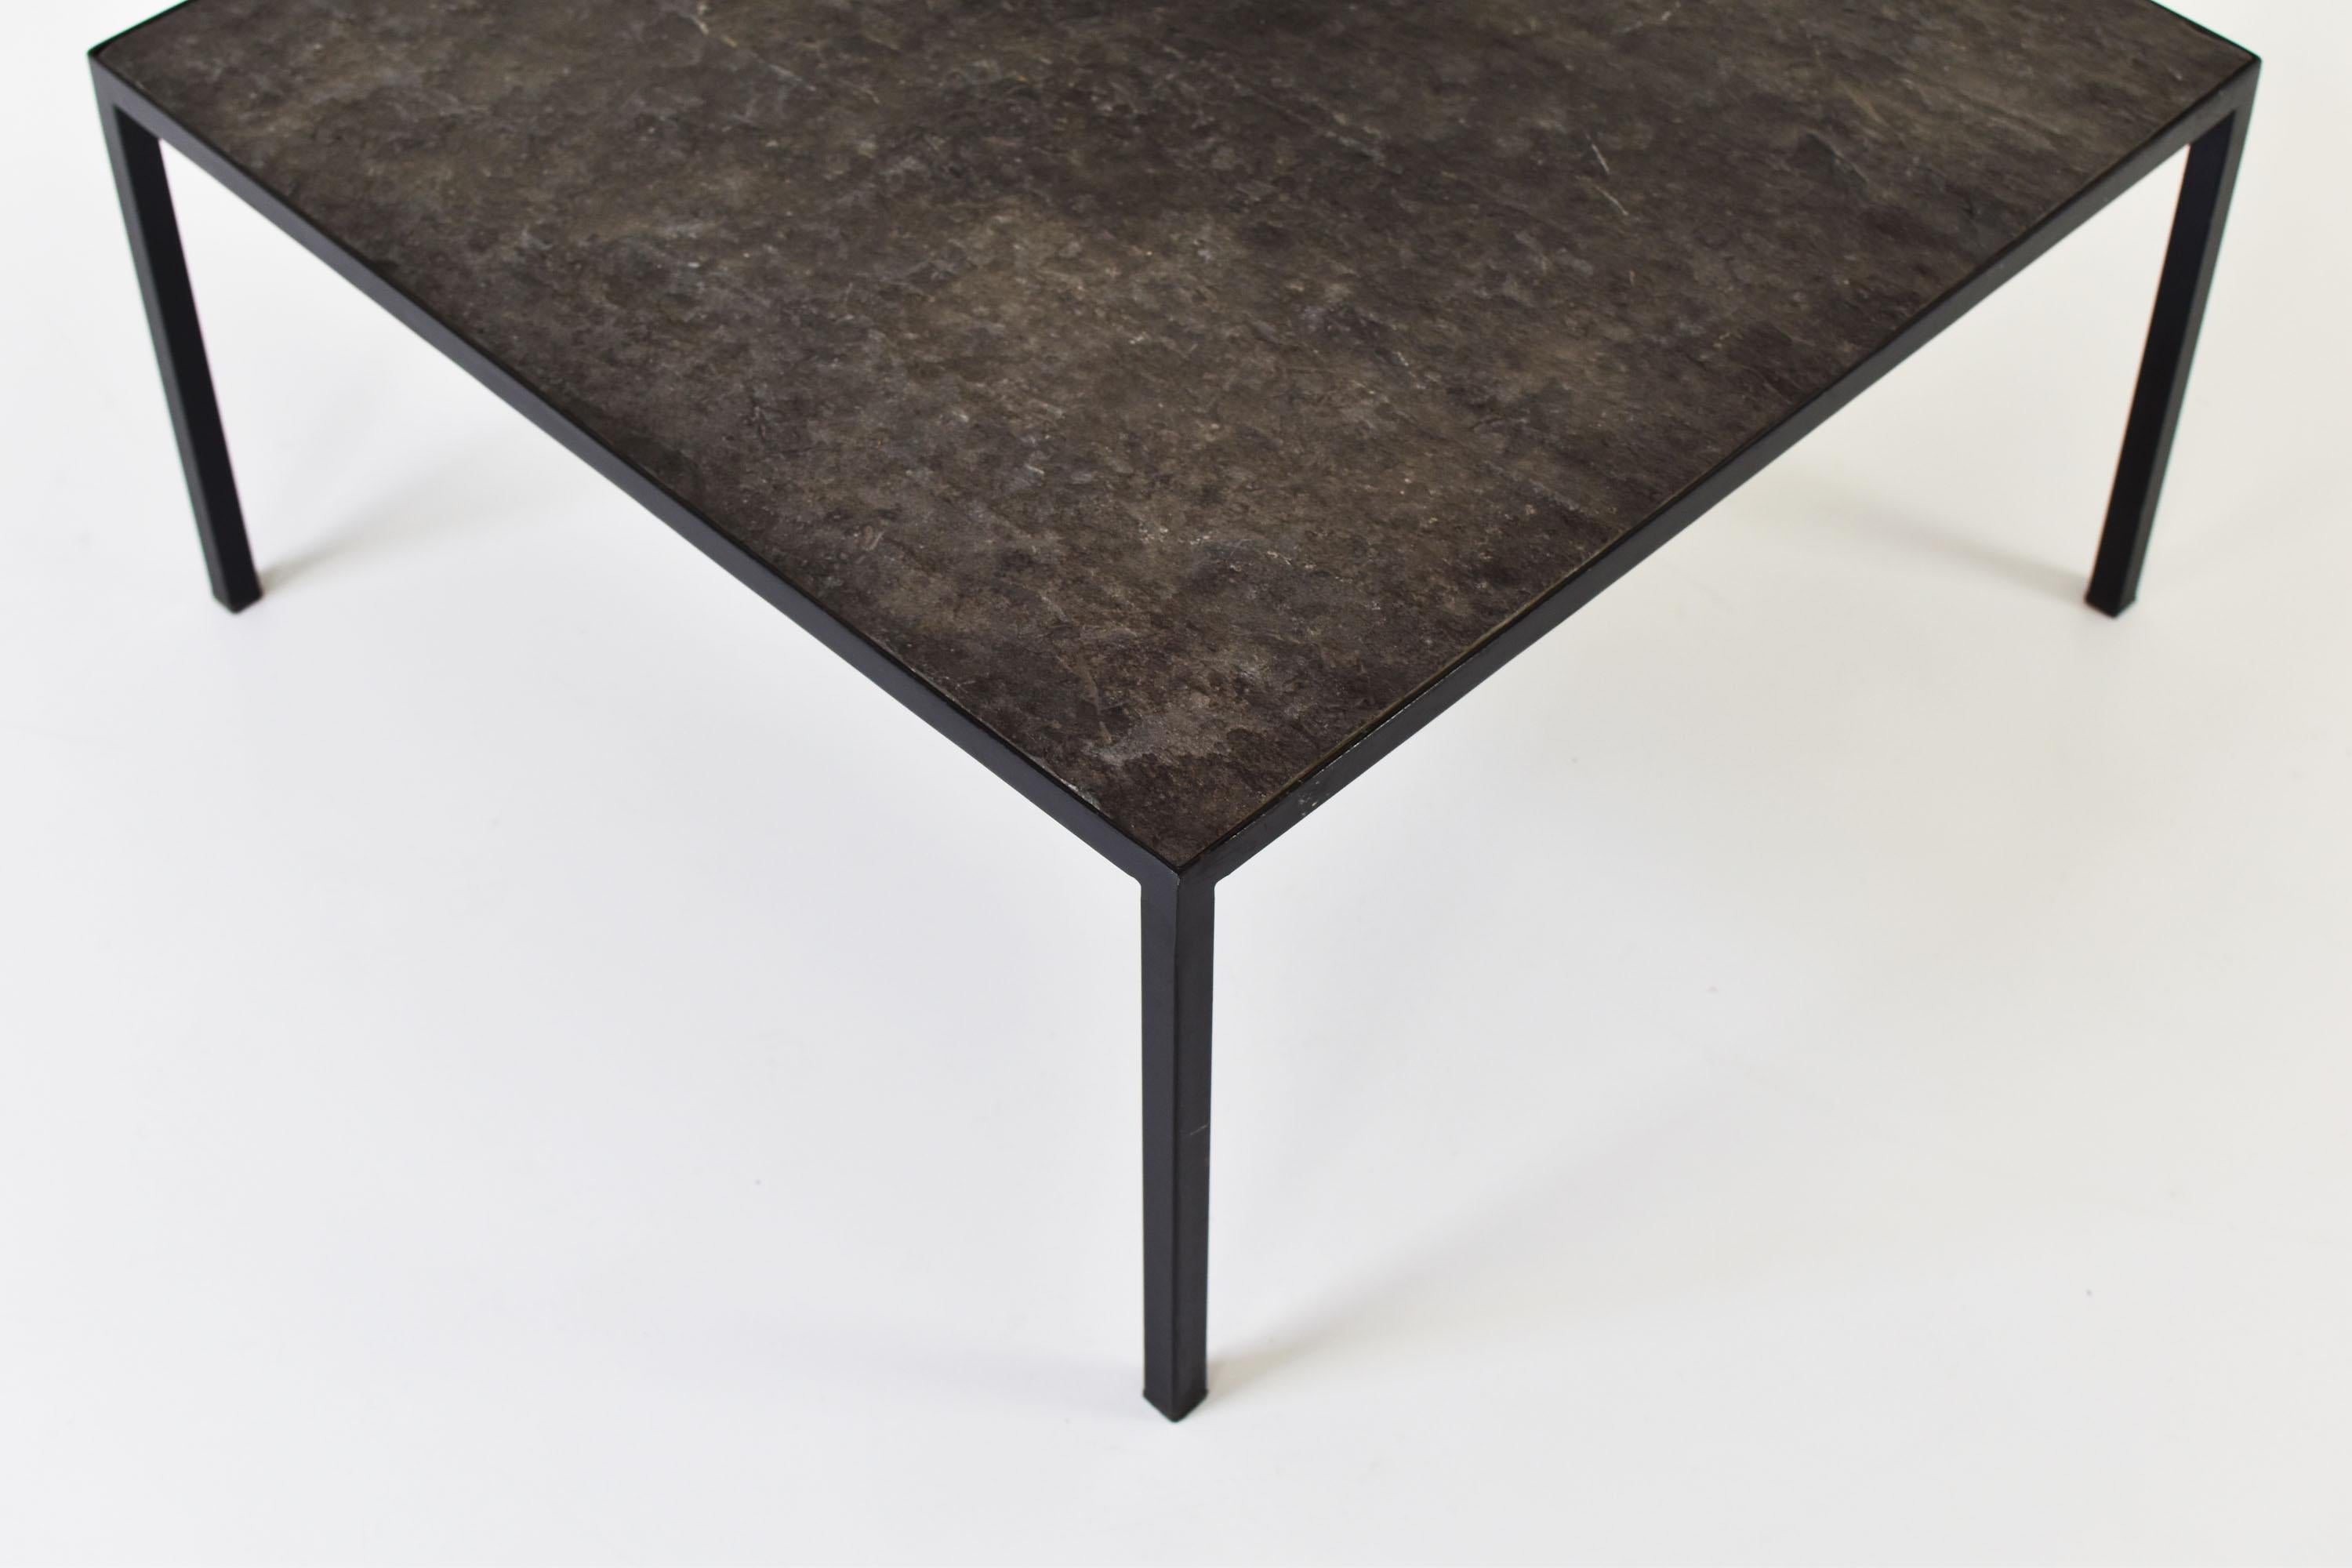 Steel Square Slate Stone Coffee Table from the 1950’s